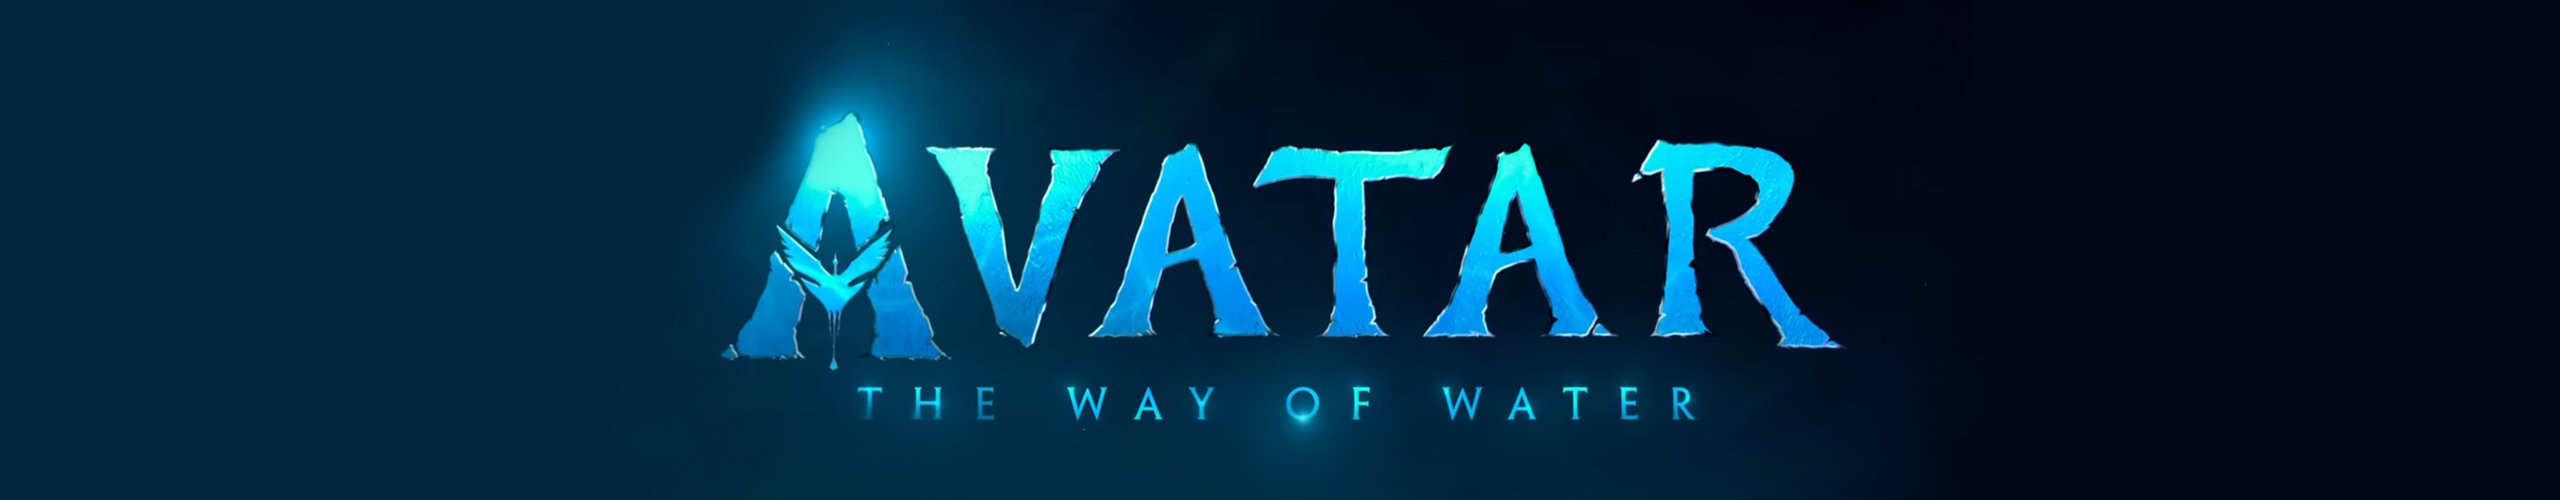 Avatar 2 - the way of water